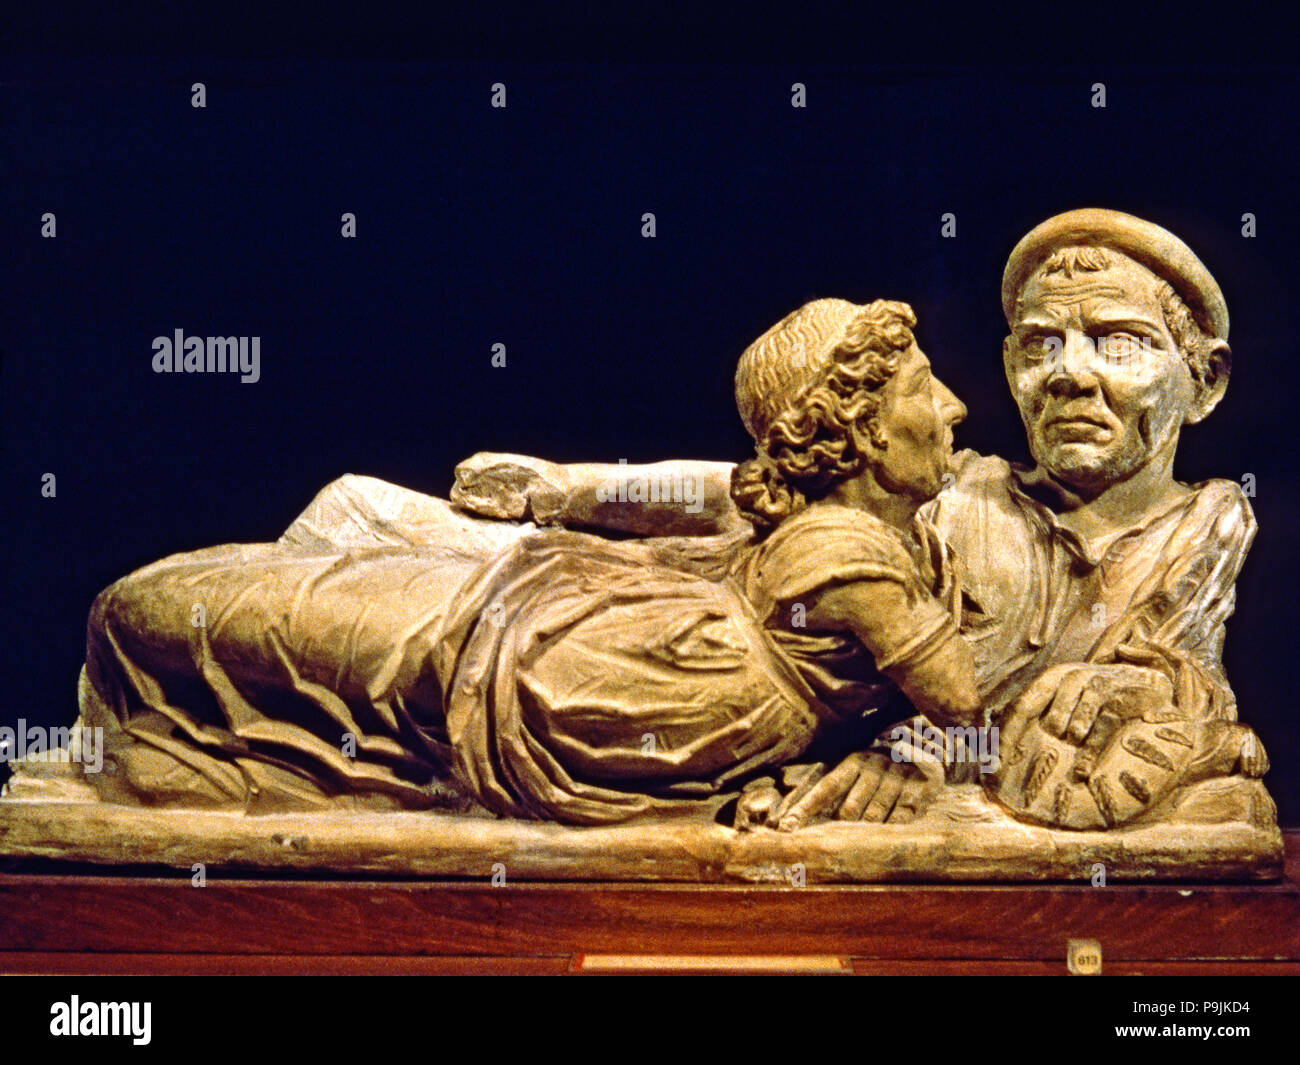 Etruscan sarcophagus in terracotta with the image of the deceased. Stock Photo